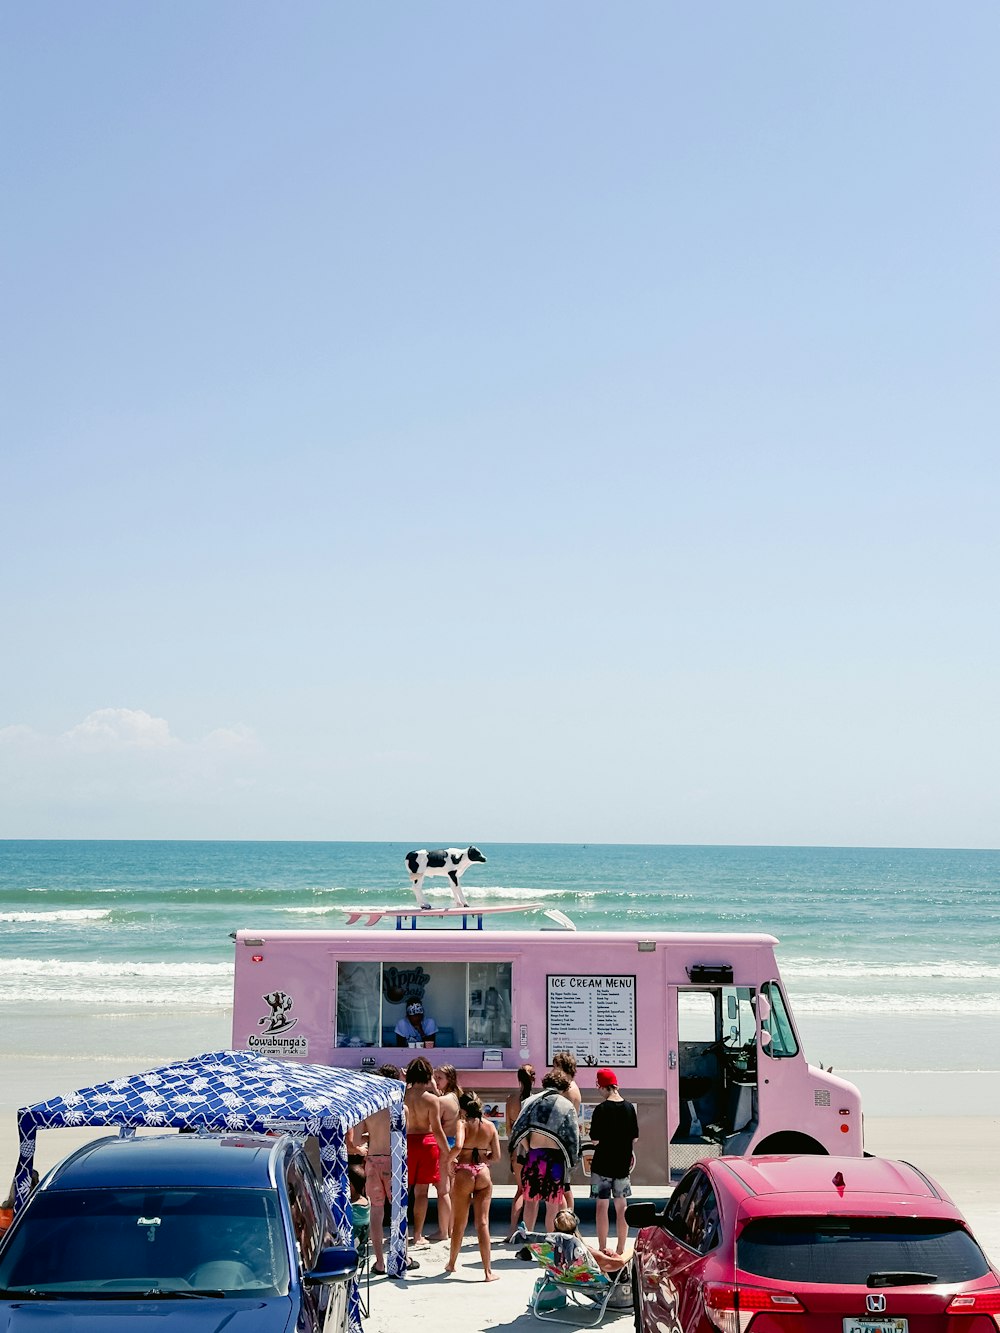 a group of people standing around a food truck on the beach